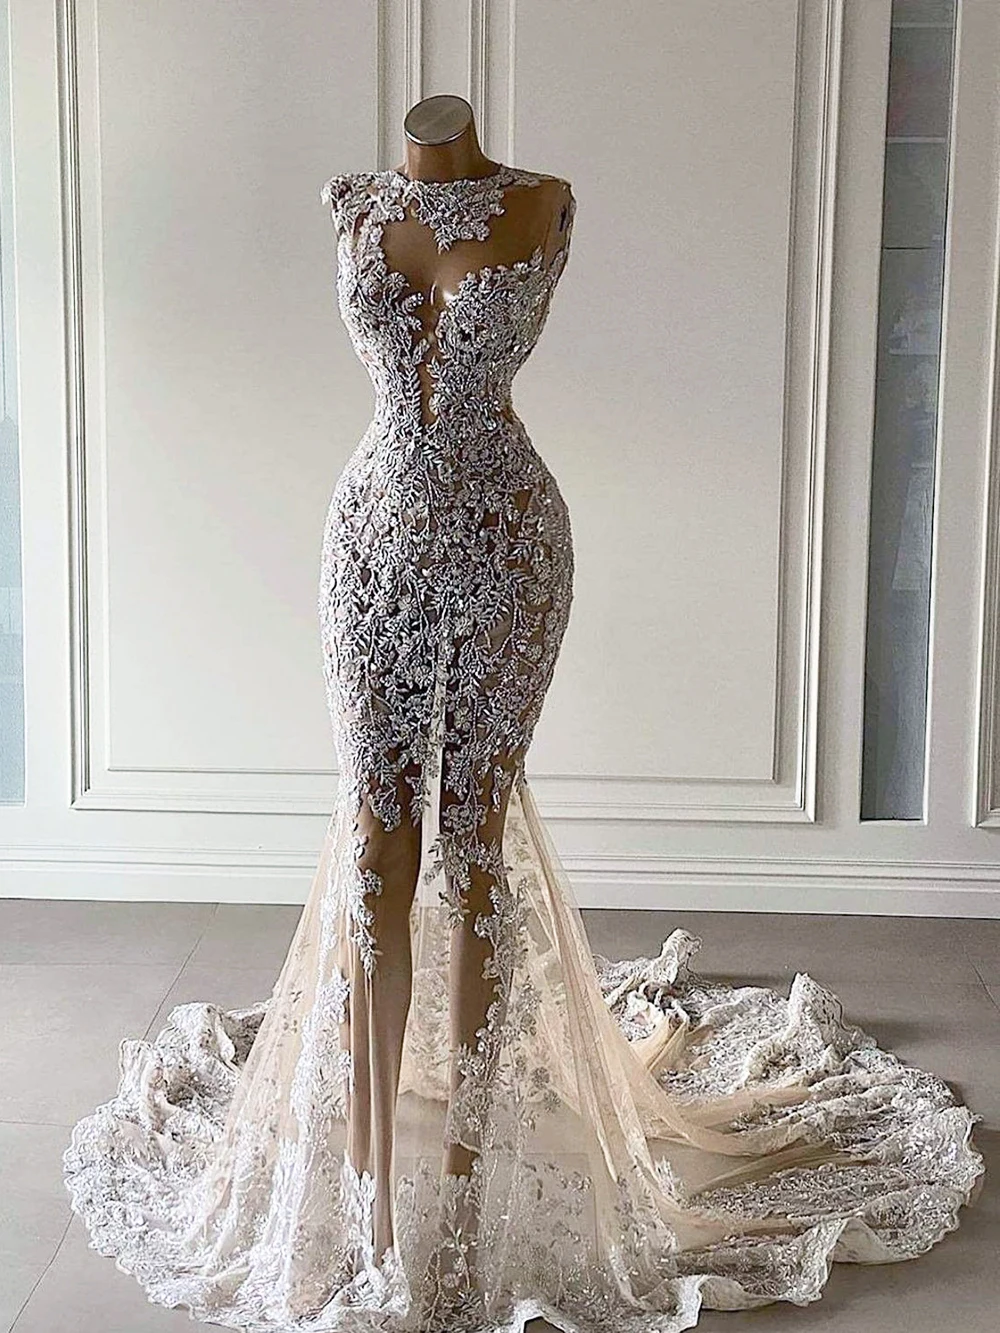 

2023 New Crystal Mermaid Wedding Dresses See Through Lace Appliqued Bridal Gowns Luxurious Sequined Dubai Wedding Dress Customis